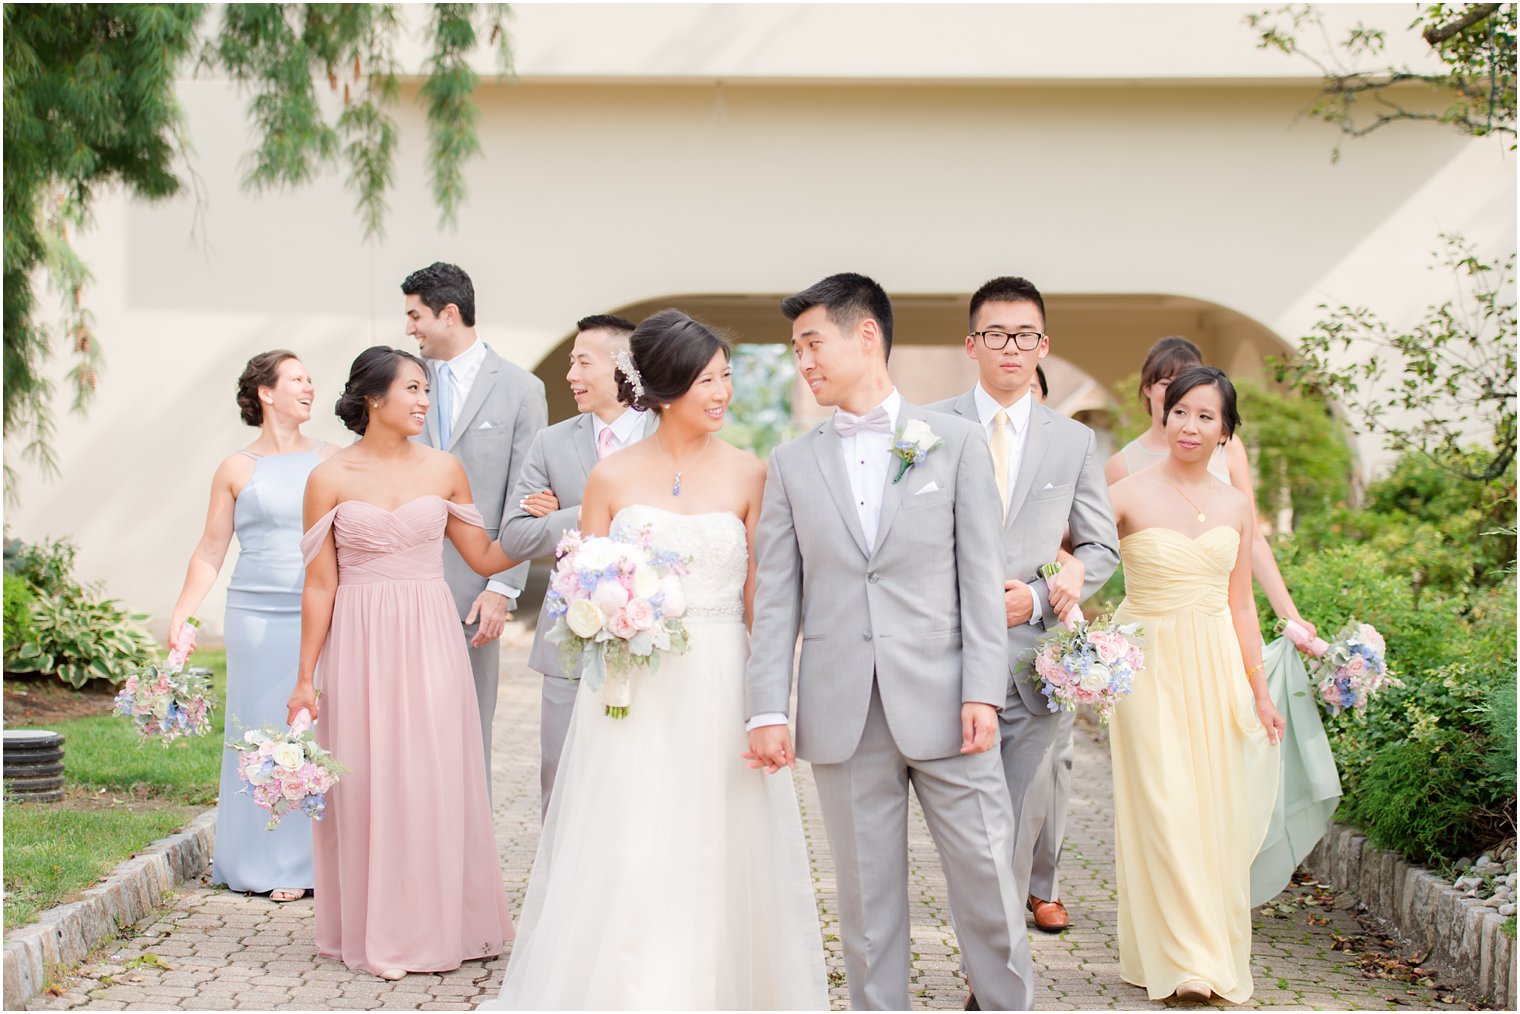 Grey and pastel wedding party portrait at The Bethwood in Totowa NJ